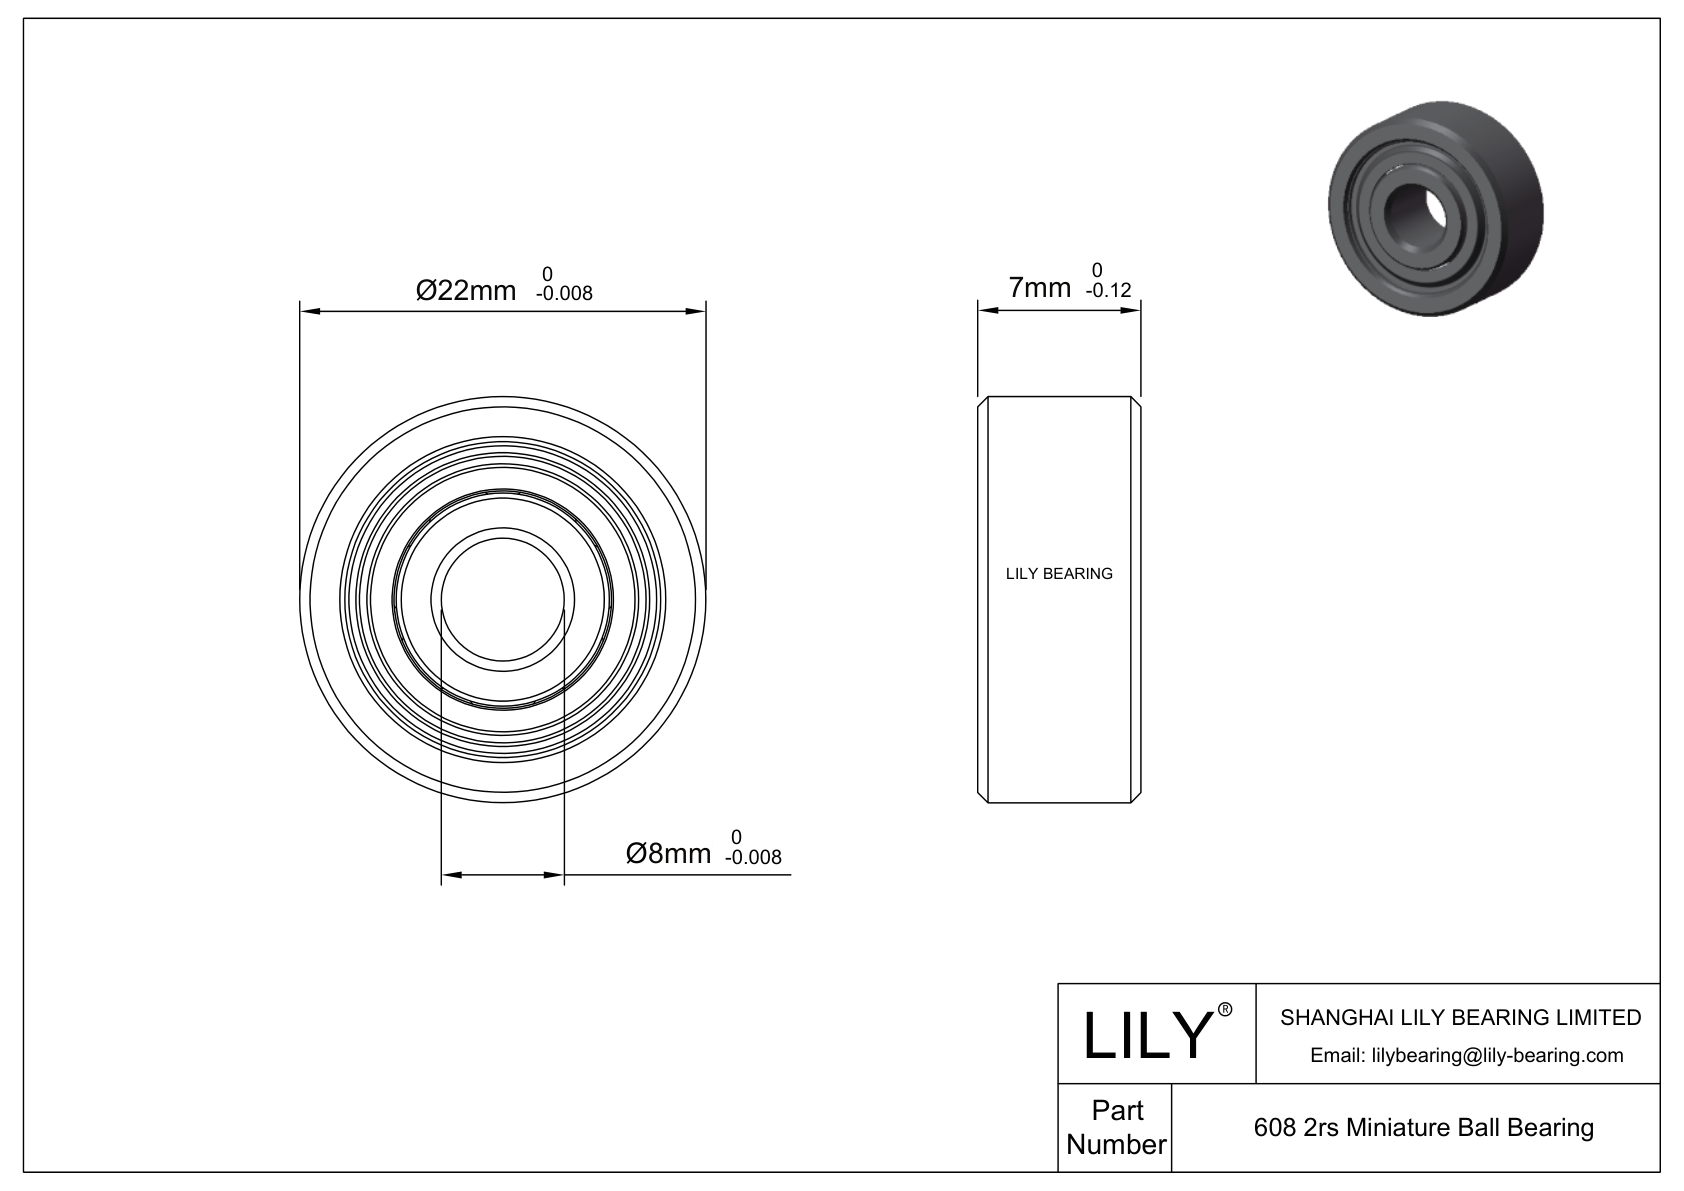 LILY-BS60840-11 POM Coated Bearing cad drawing